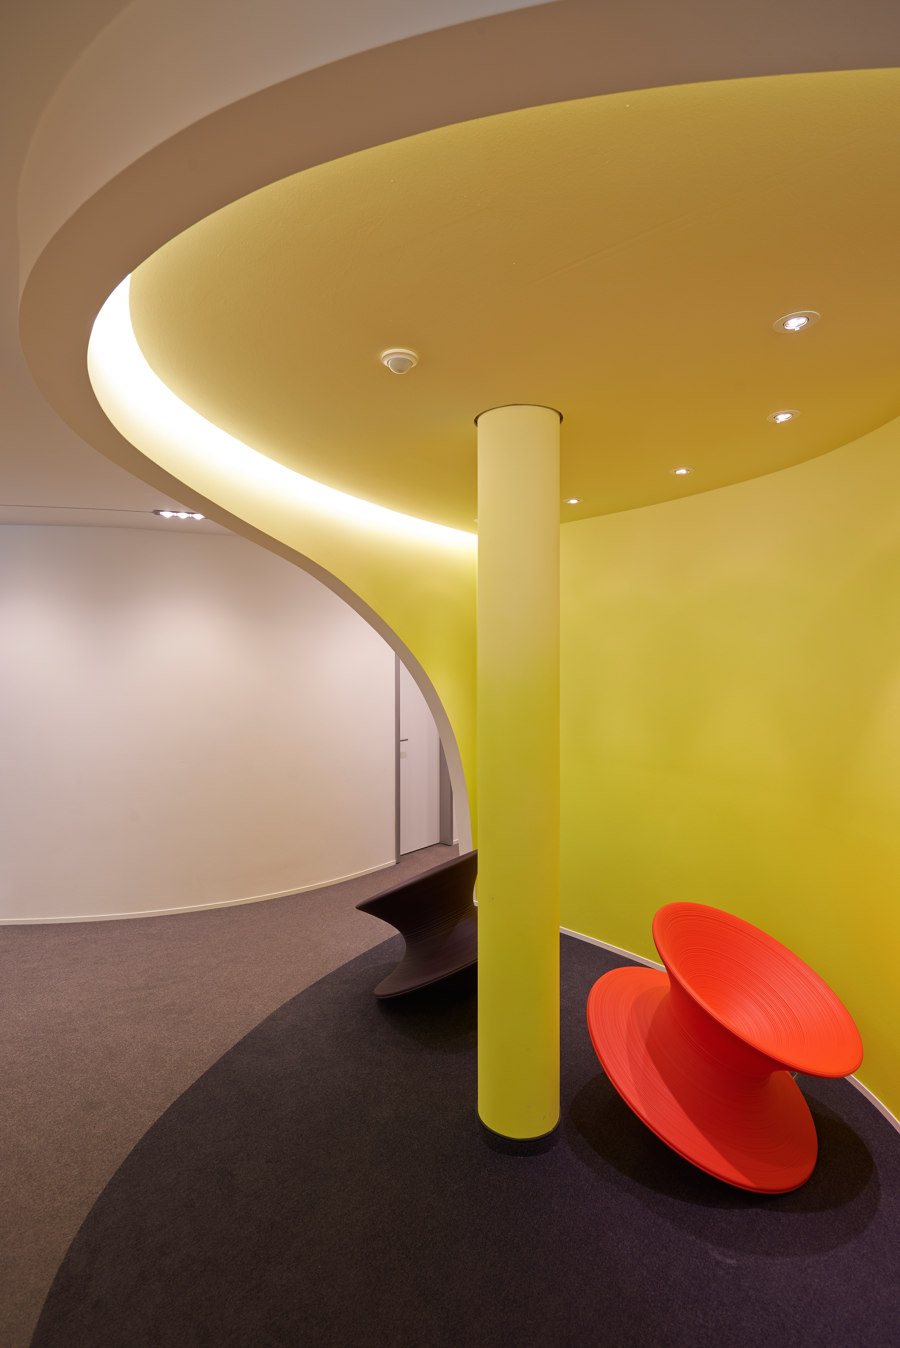 ADAC by Tobias Link | Office facilities